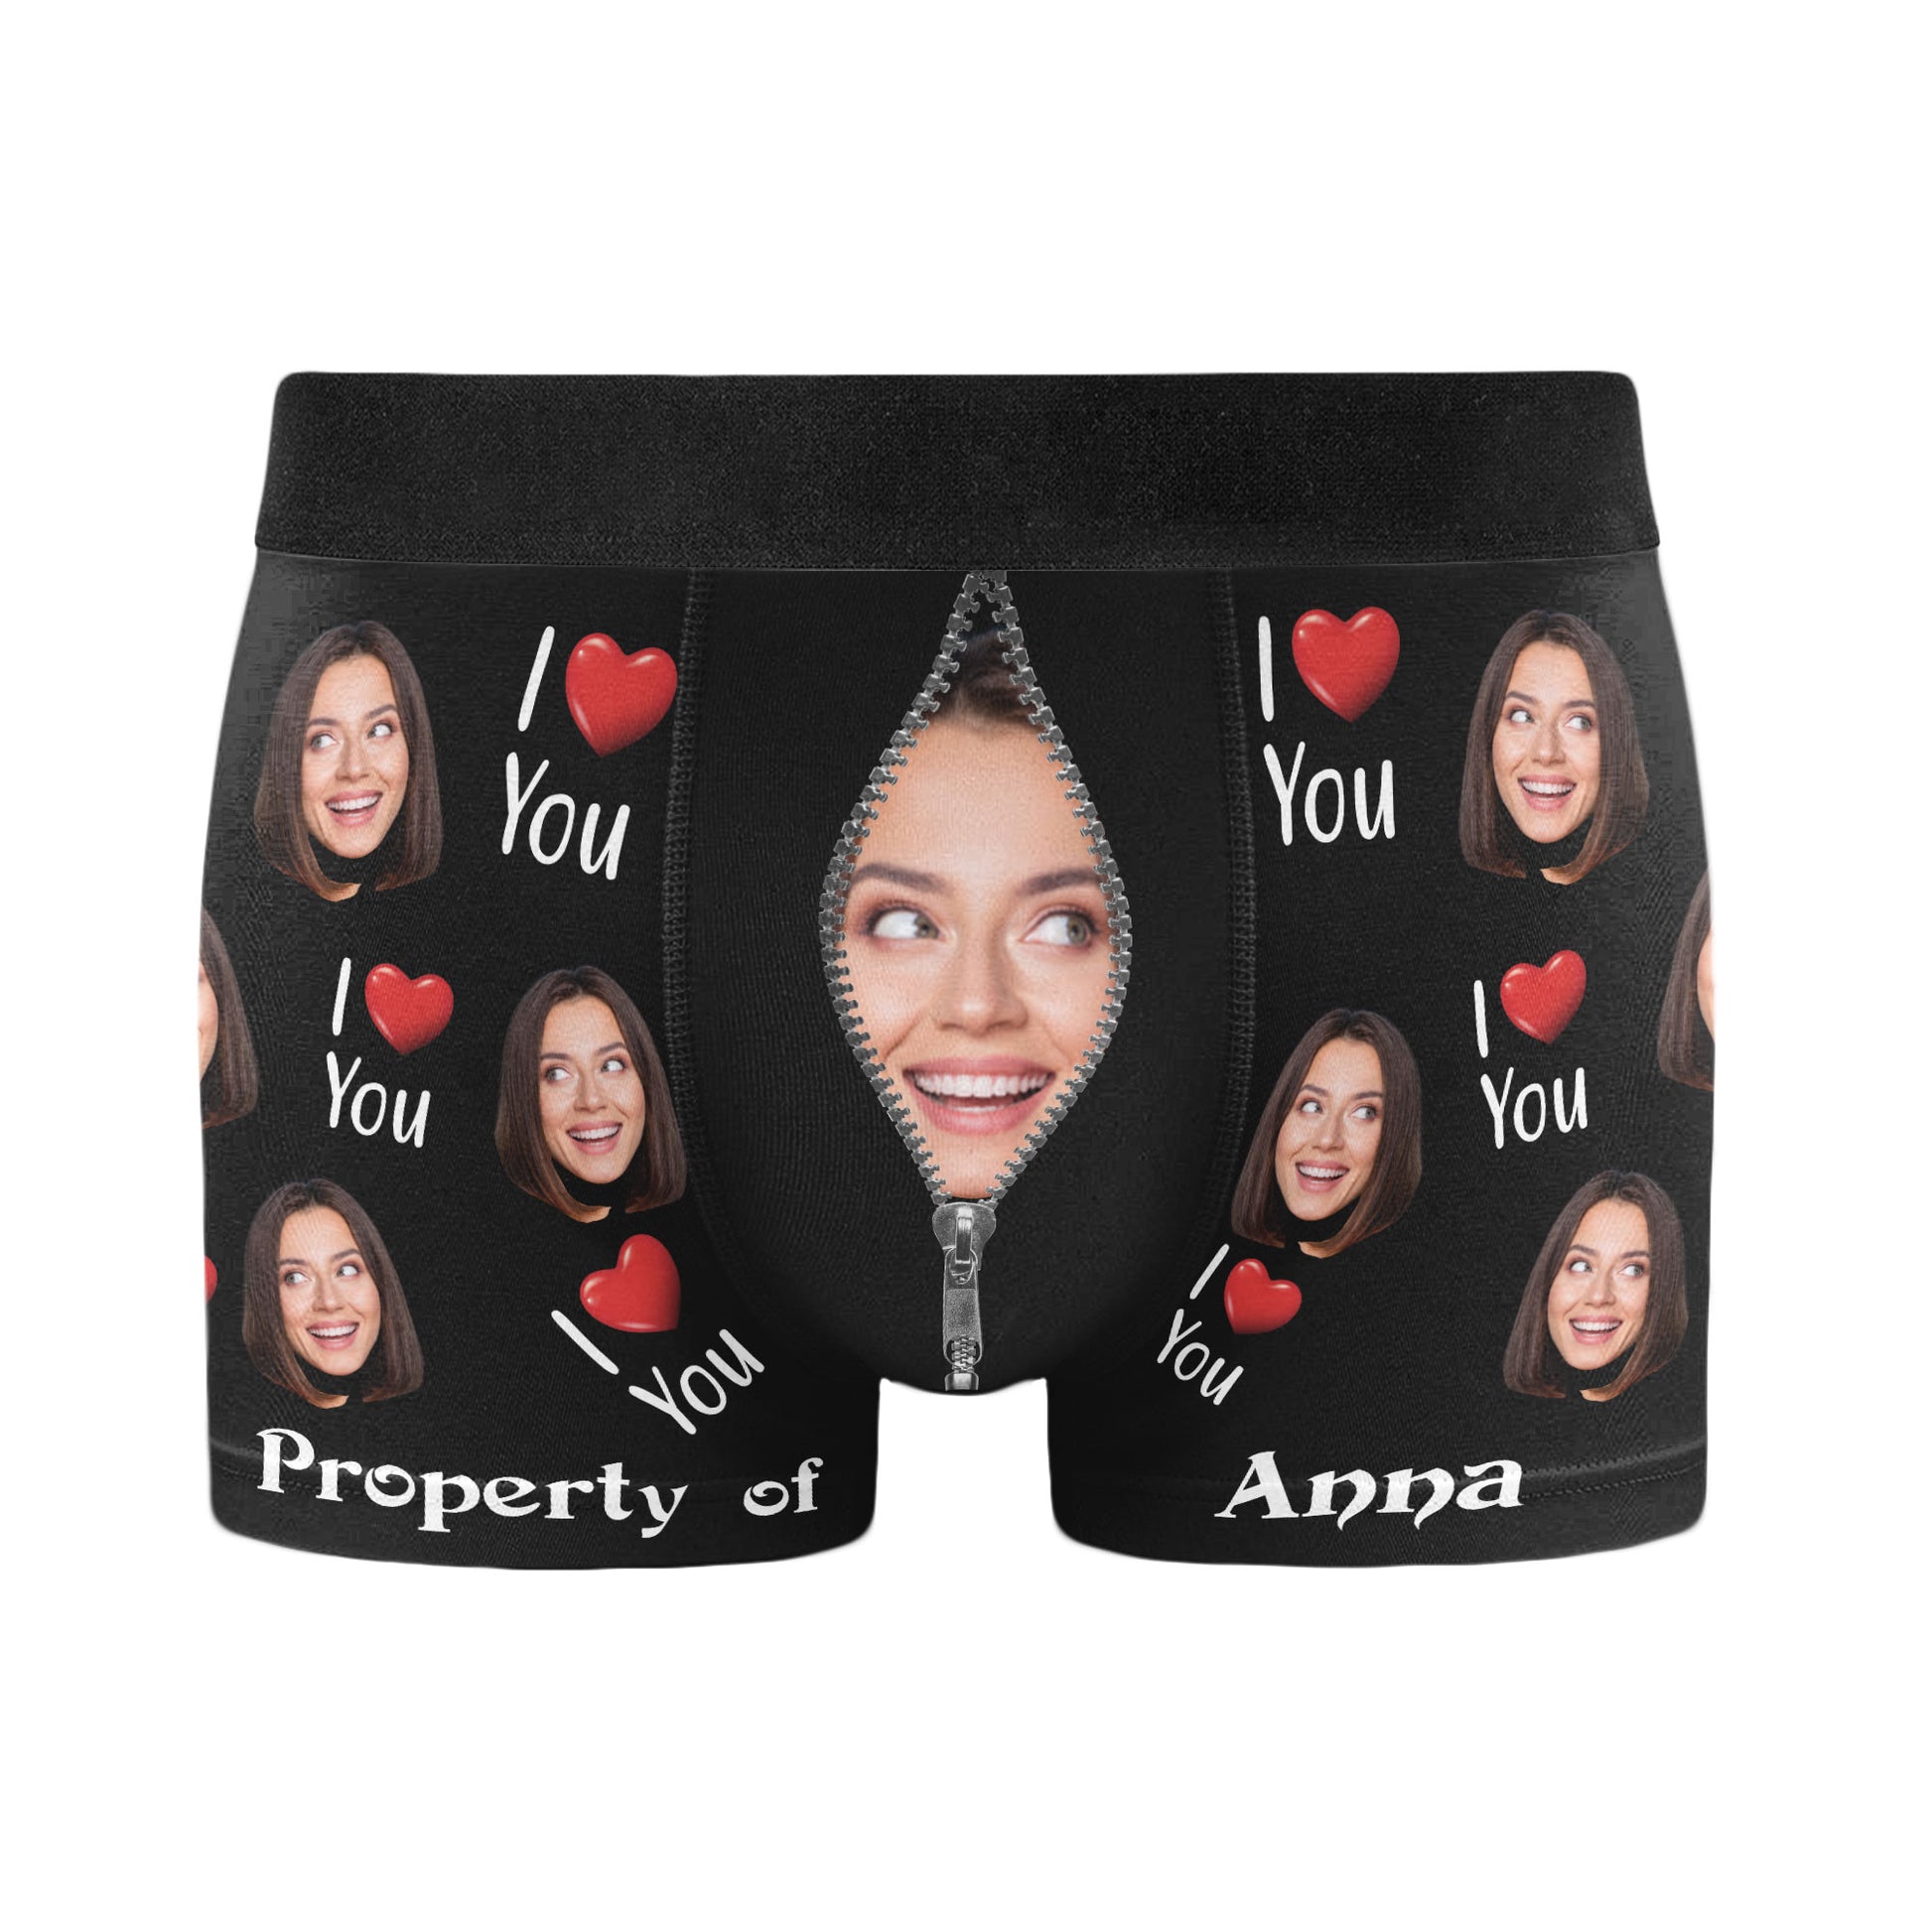 I Love my Girlfriend Boxers|Add Name|Heart|Custom Personalized Boxers|Boxer  Shorts|Boxer Briefs|Adult Underwear| valentines gift|Funny Gifts